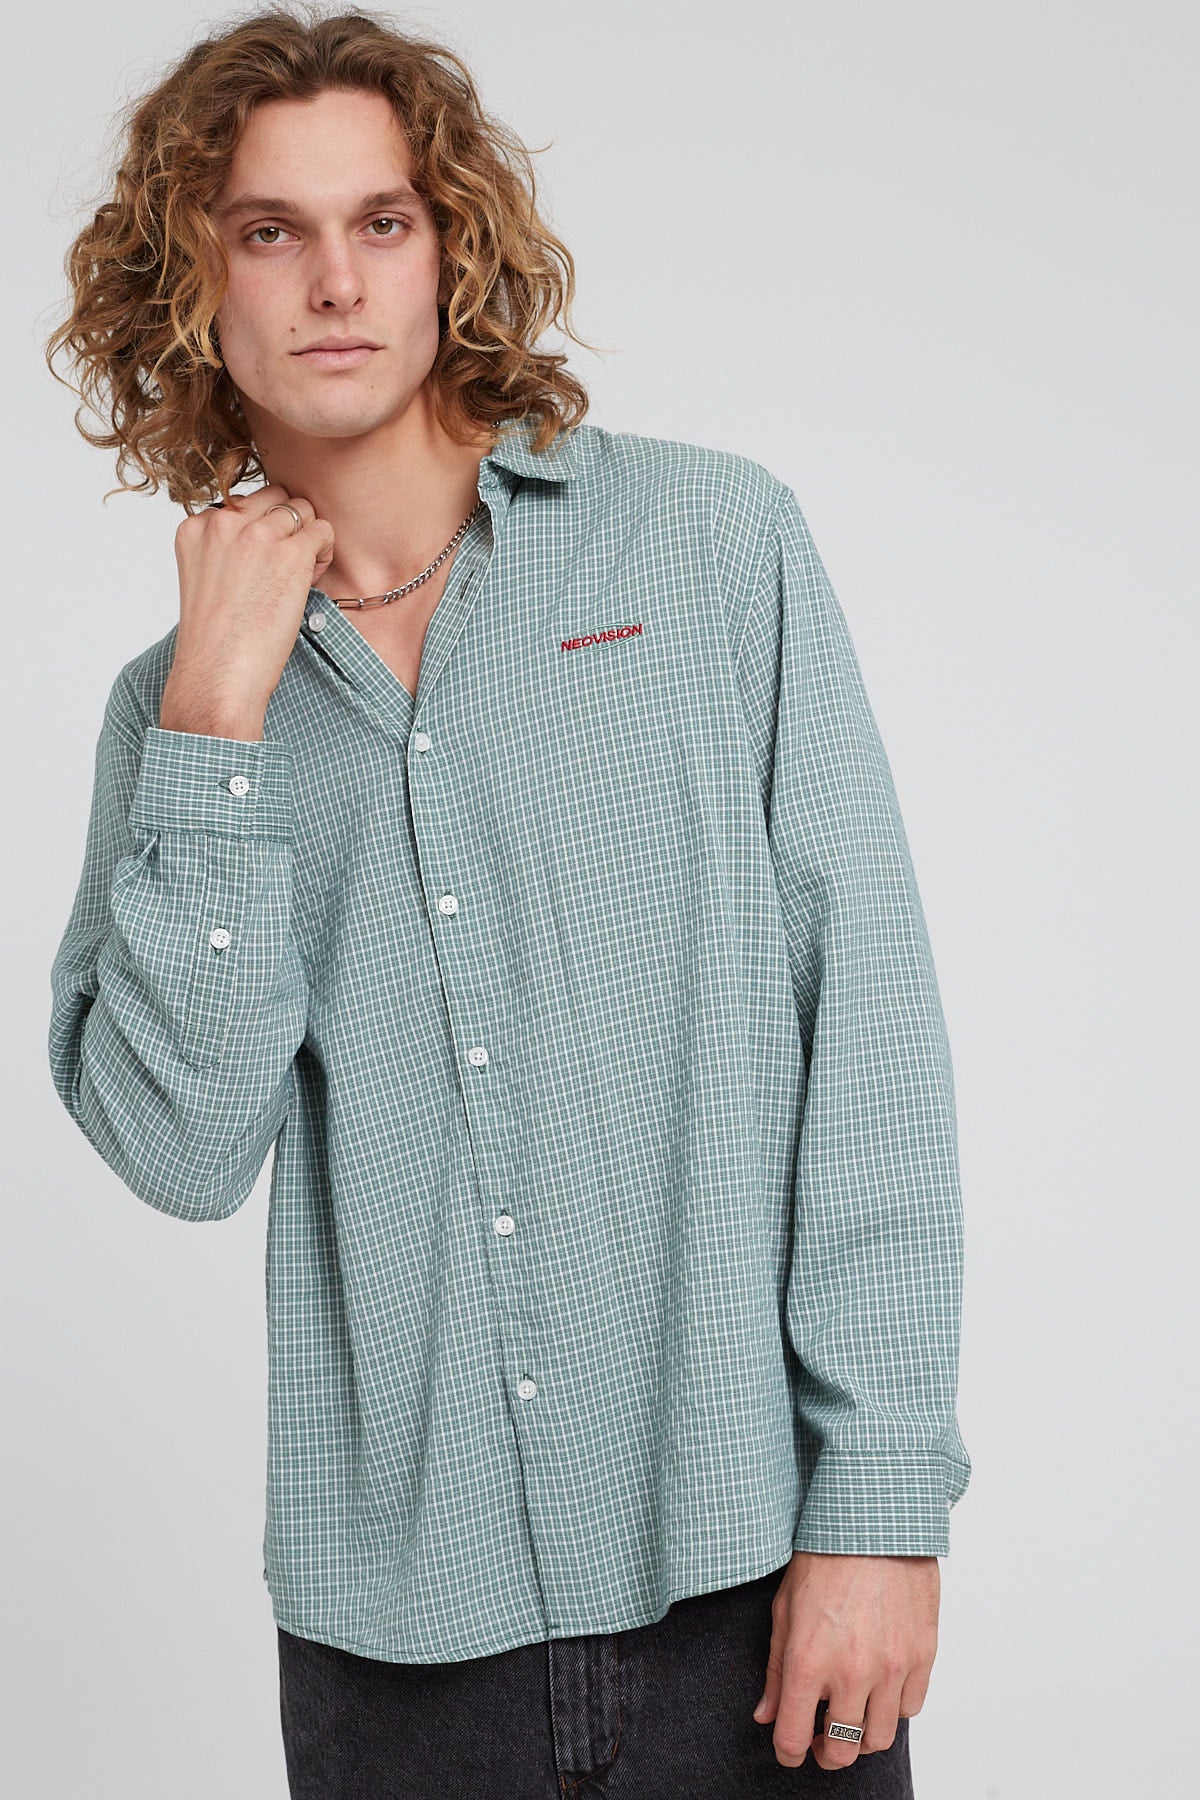 Neovision Eclipse Long Sleeve Shirt Teal Check